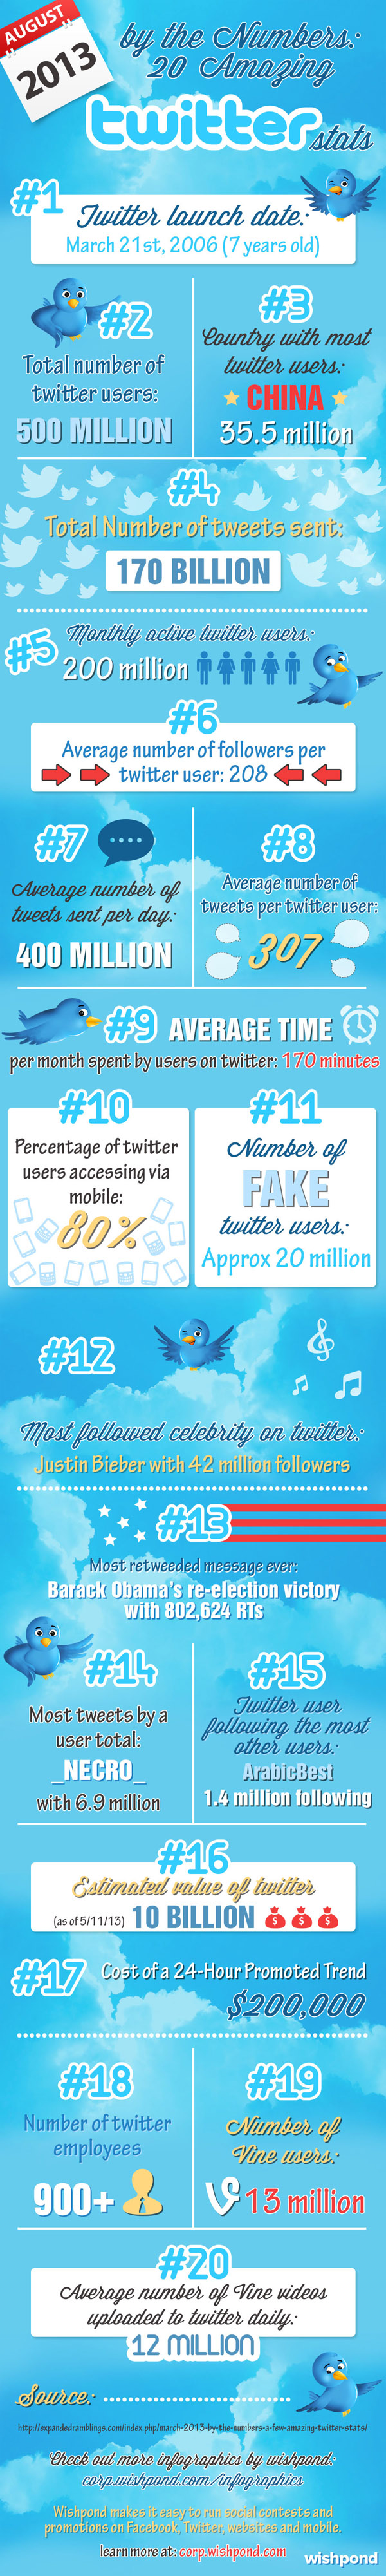 Infographic_Twitter_Stats-1